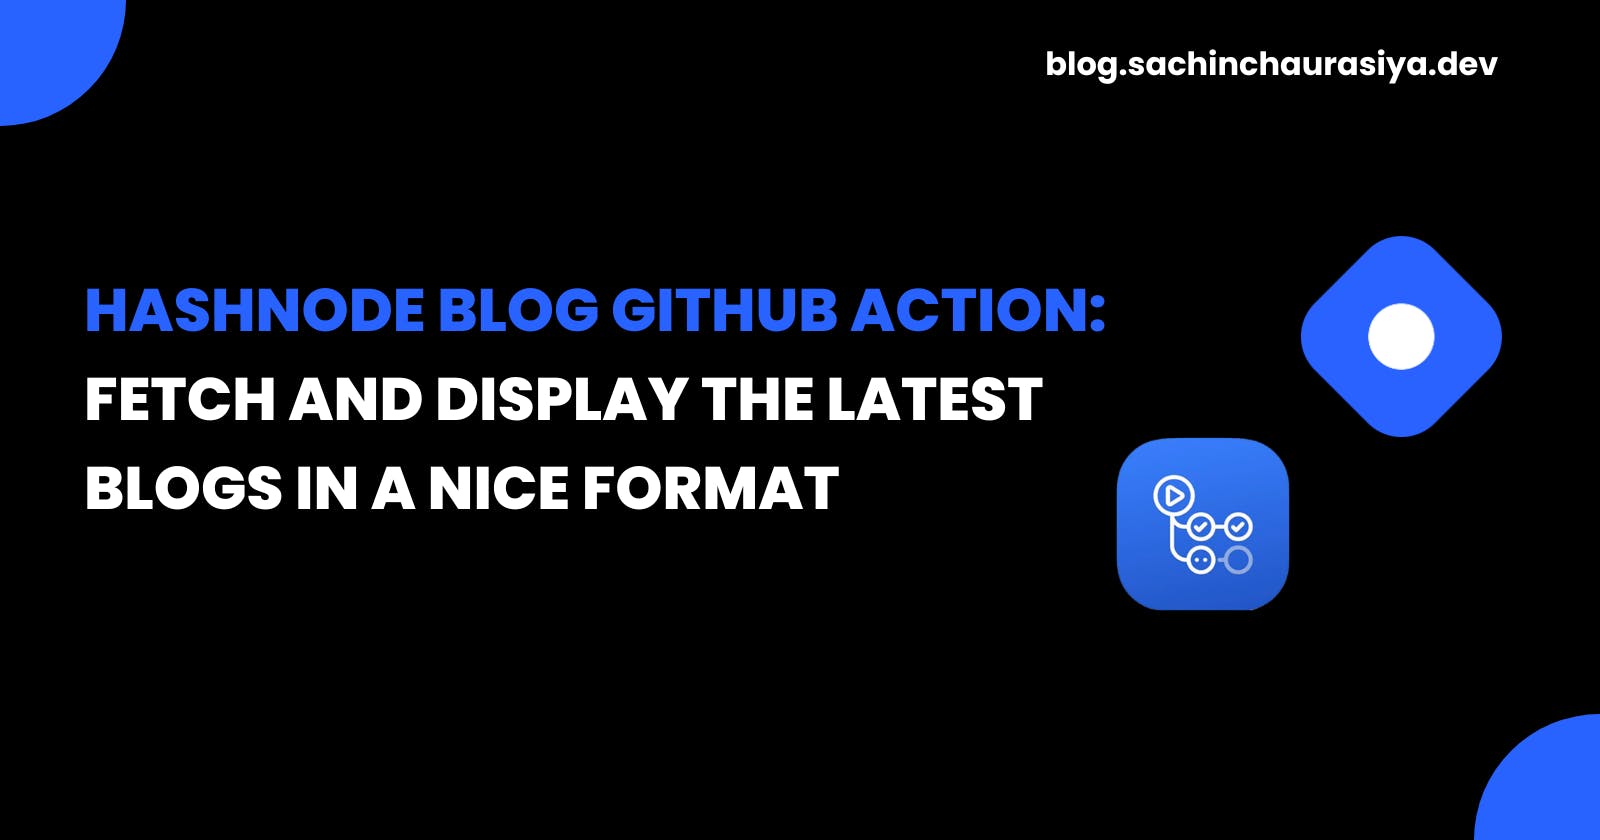 Hashnode Blog GitHub Action - fetch and display the latest blogs in a nice format